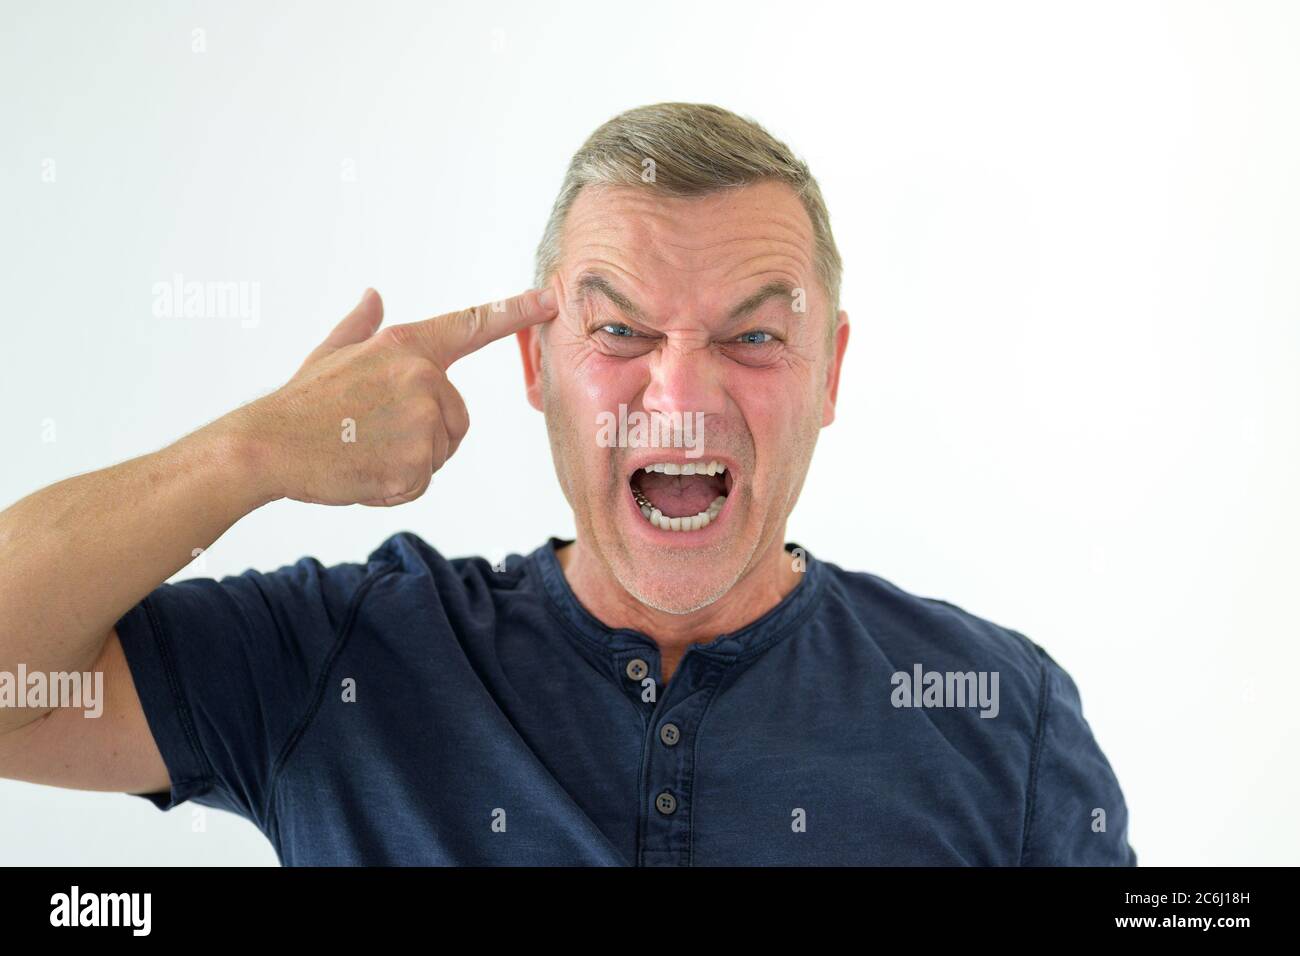 Angry man making a gun gesture pointing to his head as he yells at the camera isolated on white Stock Photo